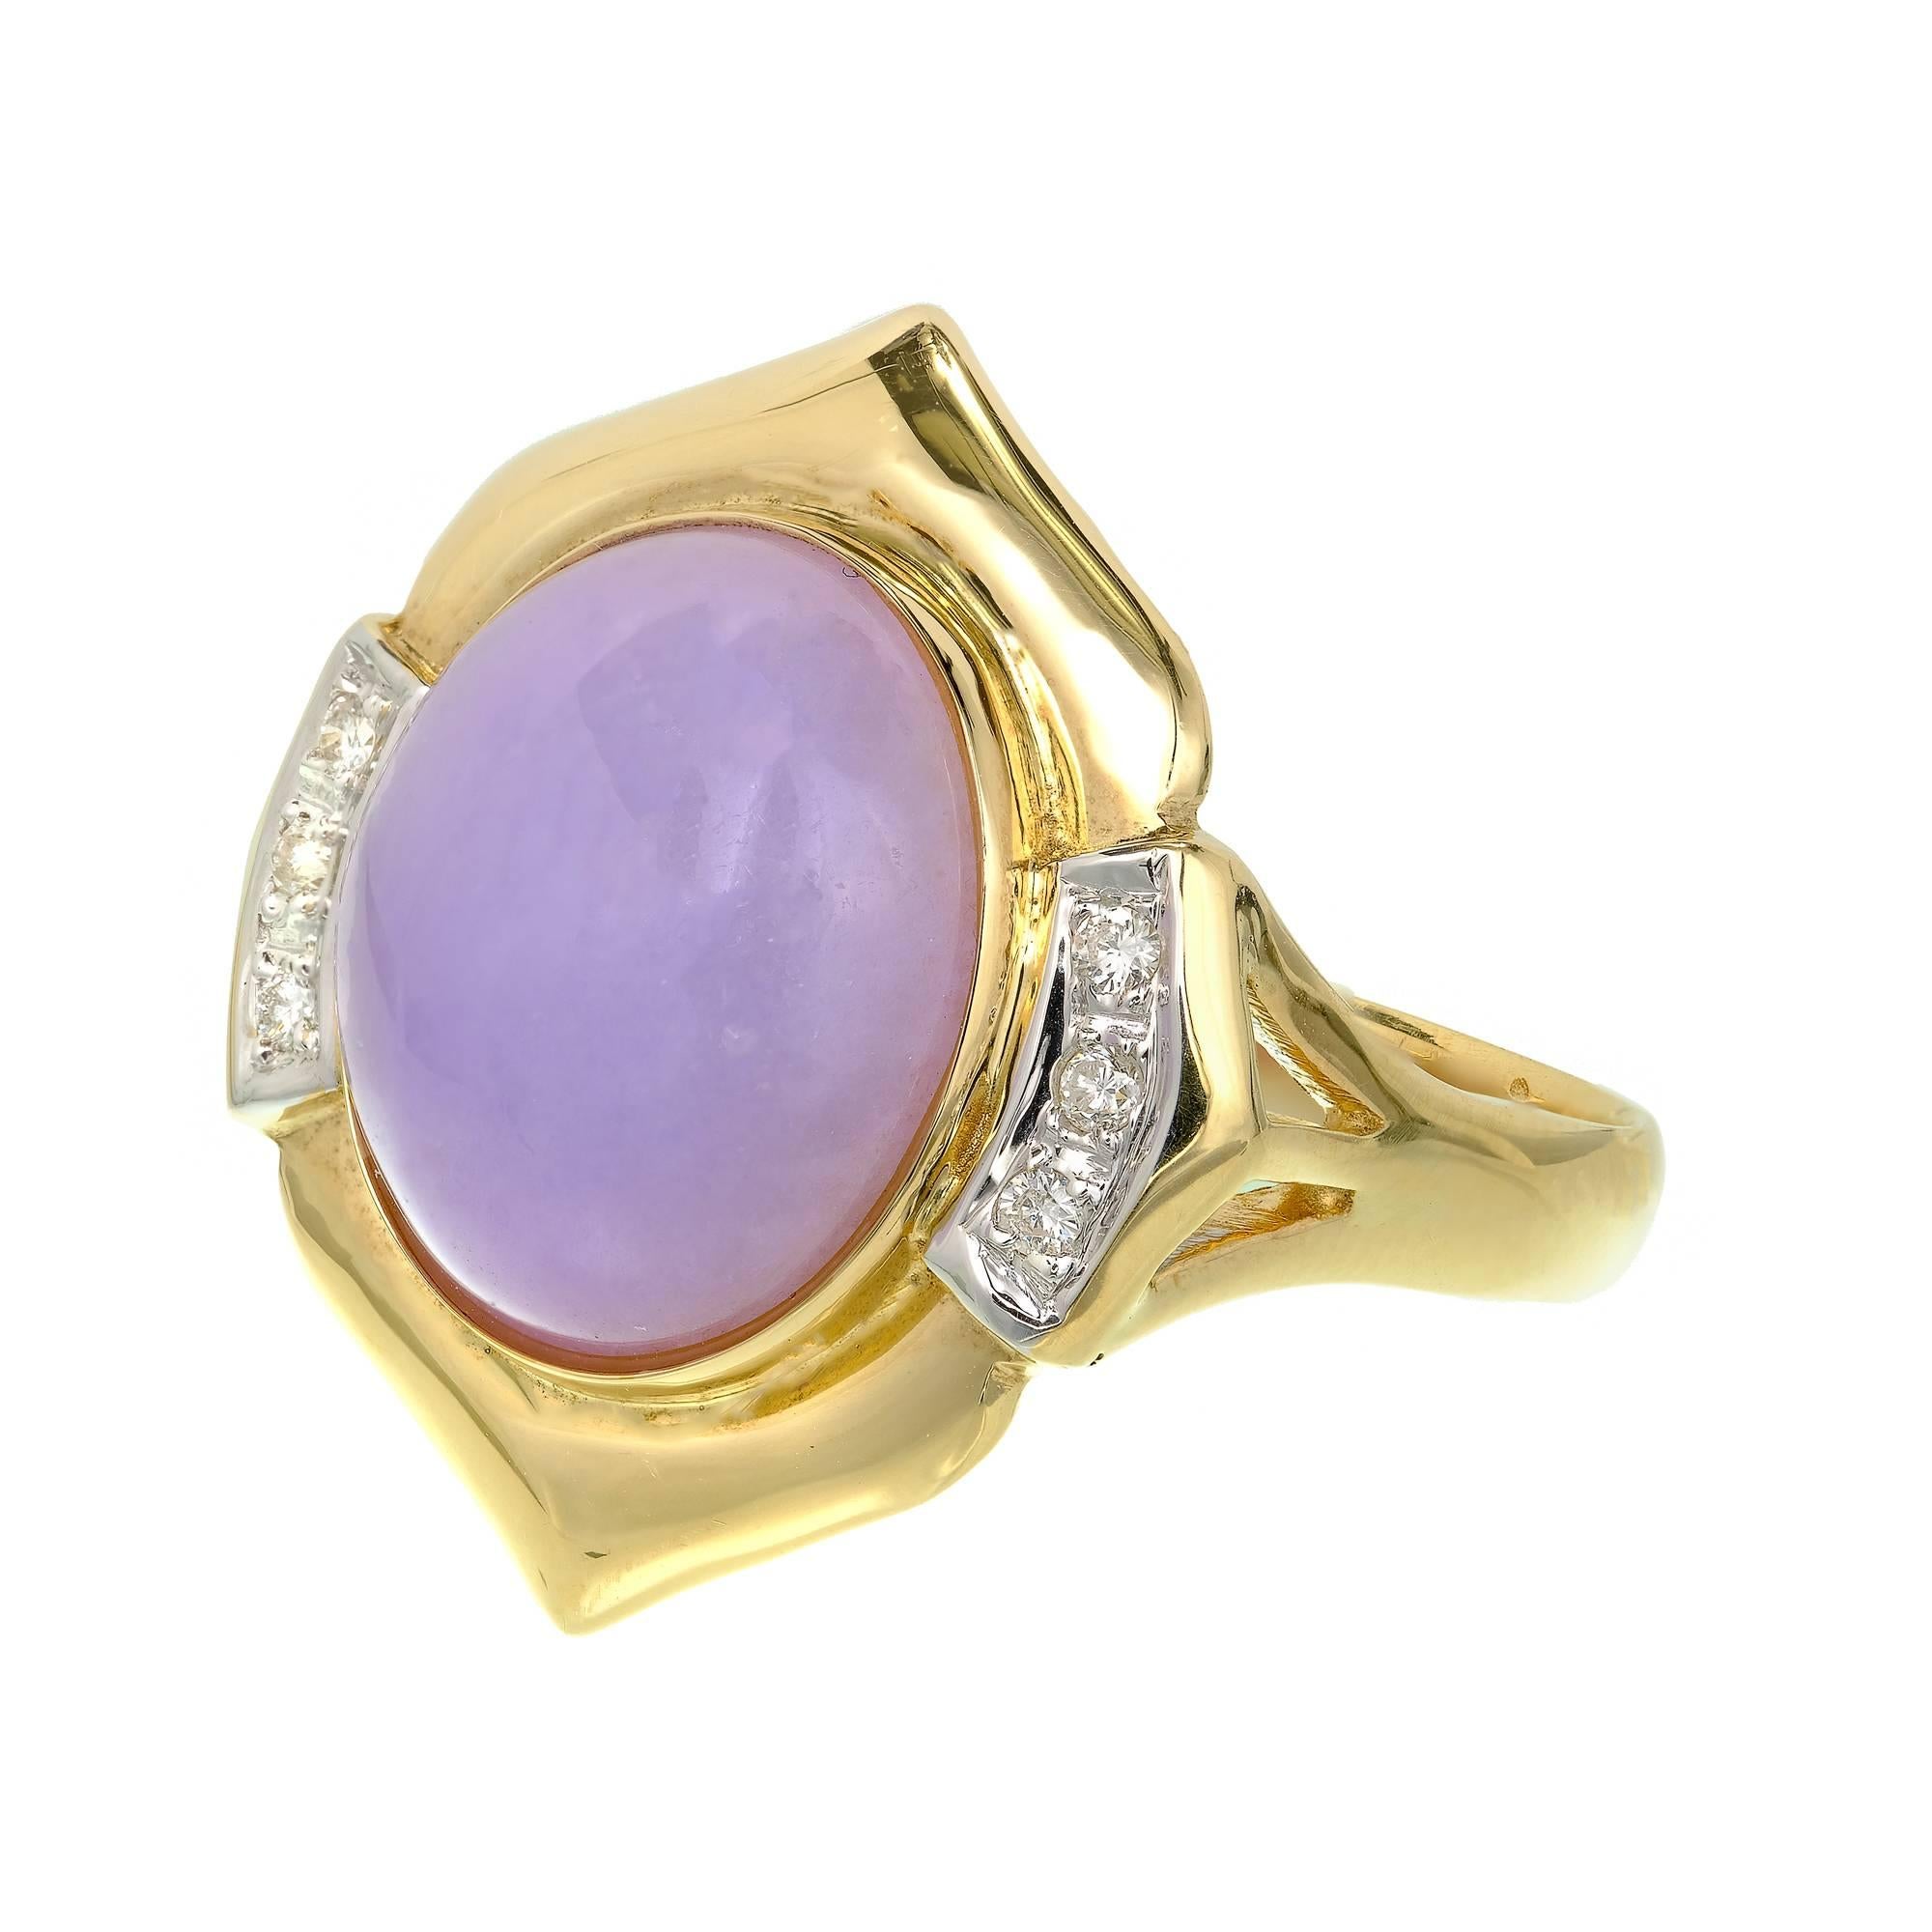 Lavender Jadeite Jade ring with sparkly full cut Diamond accents in a handmade 14k yellow gold setting.

1 oval cabochon purple Jadeite Jade, 13.92 x 12.24 x 7.06mm, GIA certificate #2185640058
6 full cut Diamonds, approx. total weight .10cts, G,